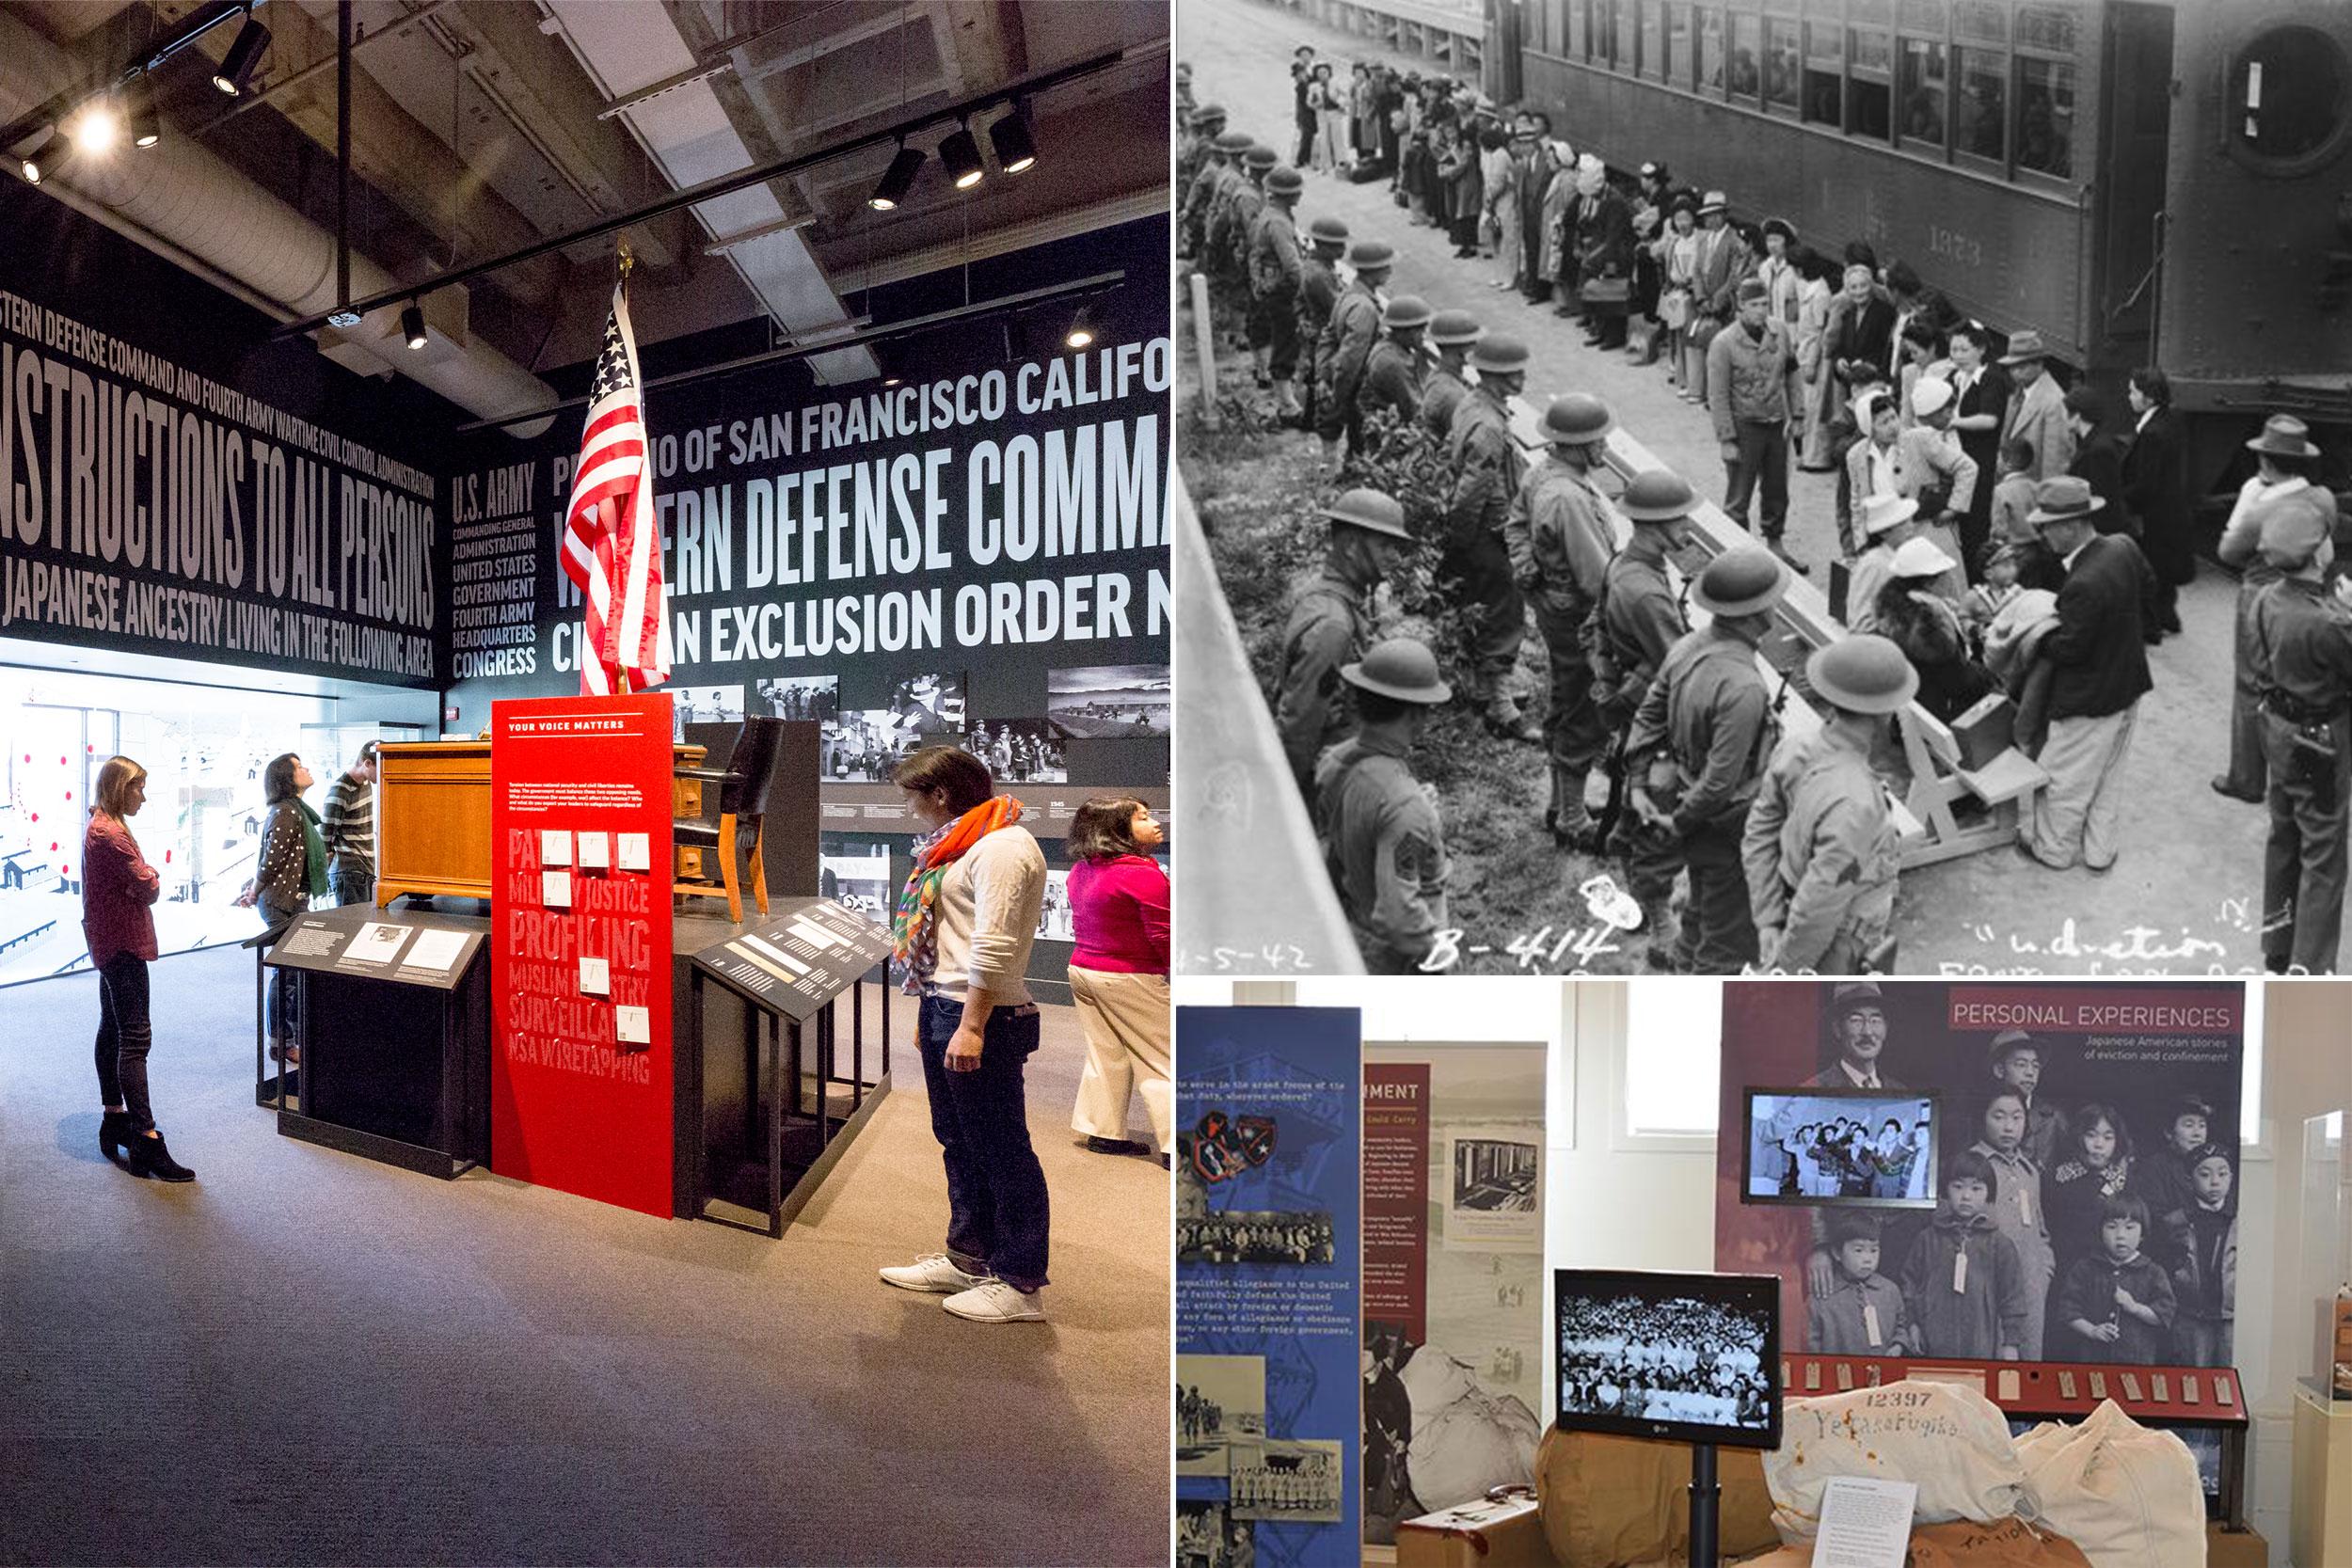 Japanese American Incarceration Exhibitions in the Presidio